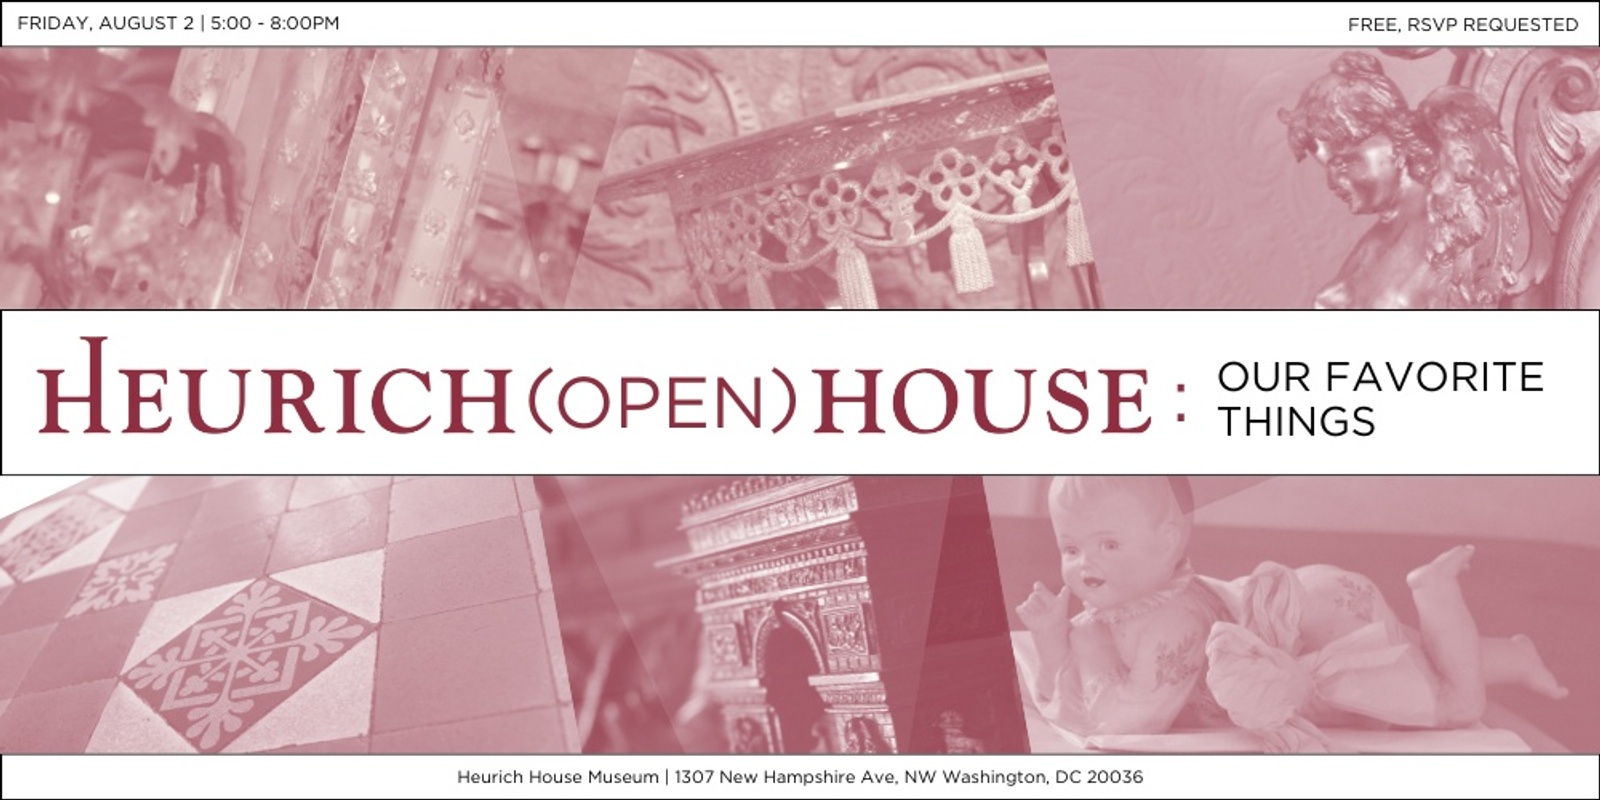 Banner image for Heurich (Open) House: Our Favorite Things